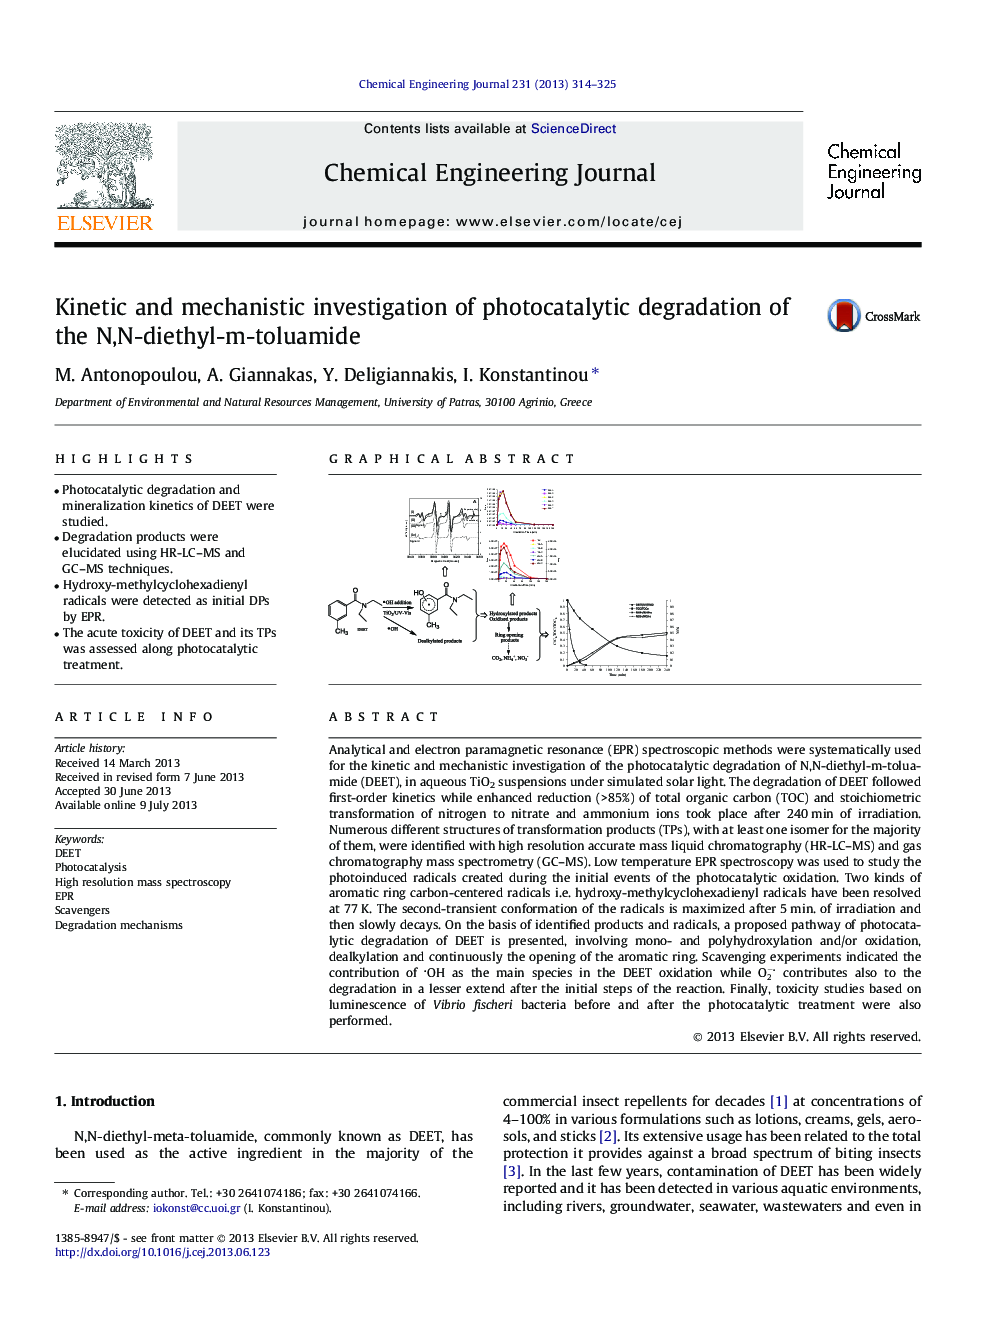 Kinetic and mechanistic investigation of photocatalytic degradation of the N,N-diethyl-m-toluamide